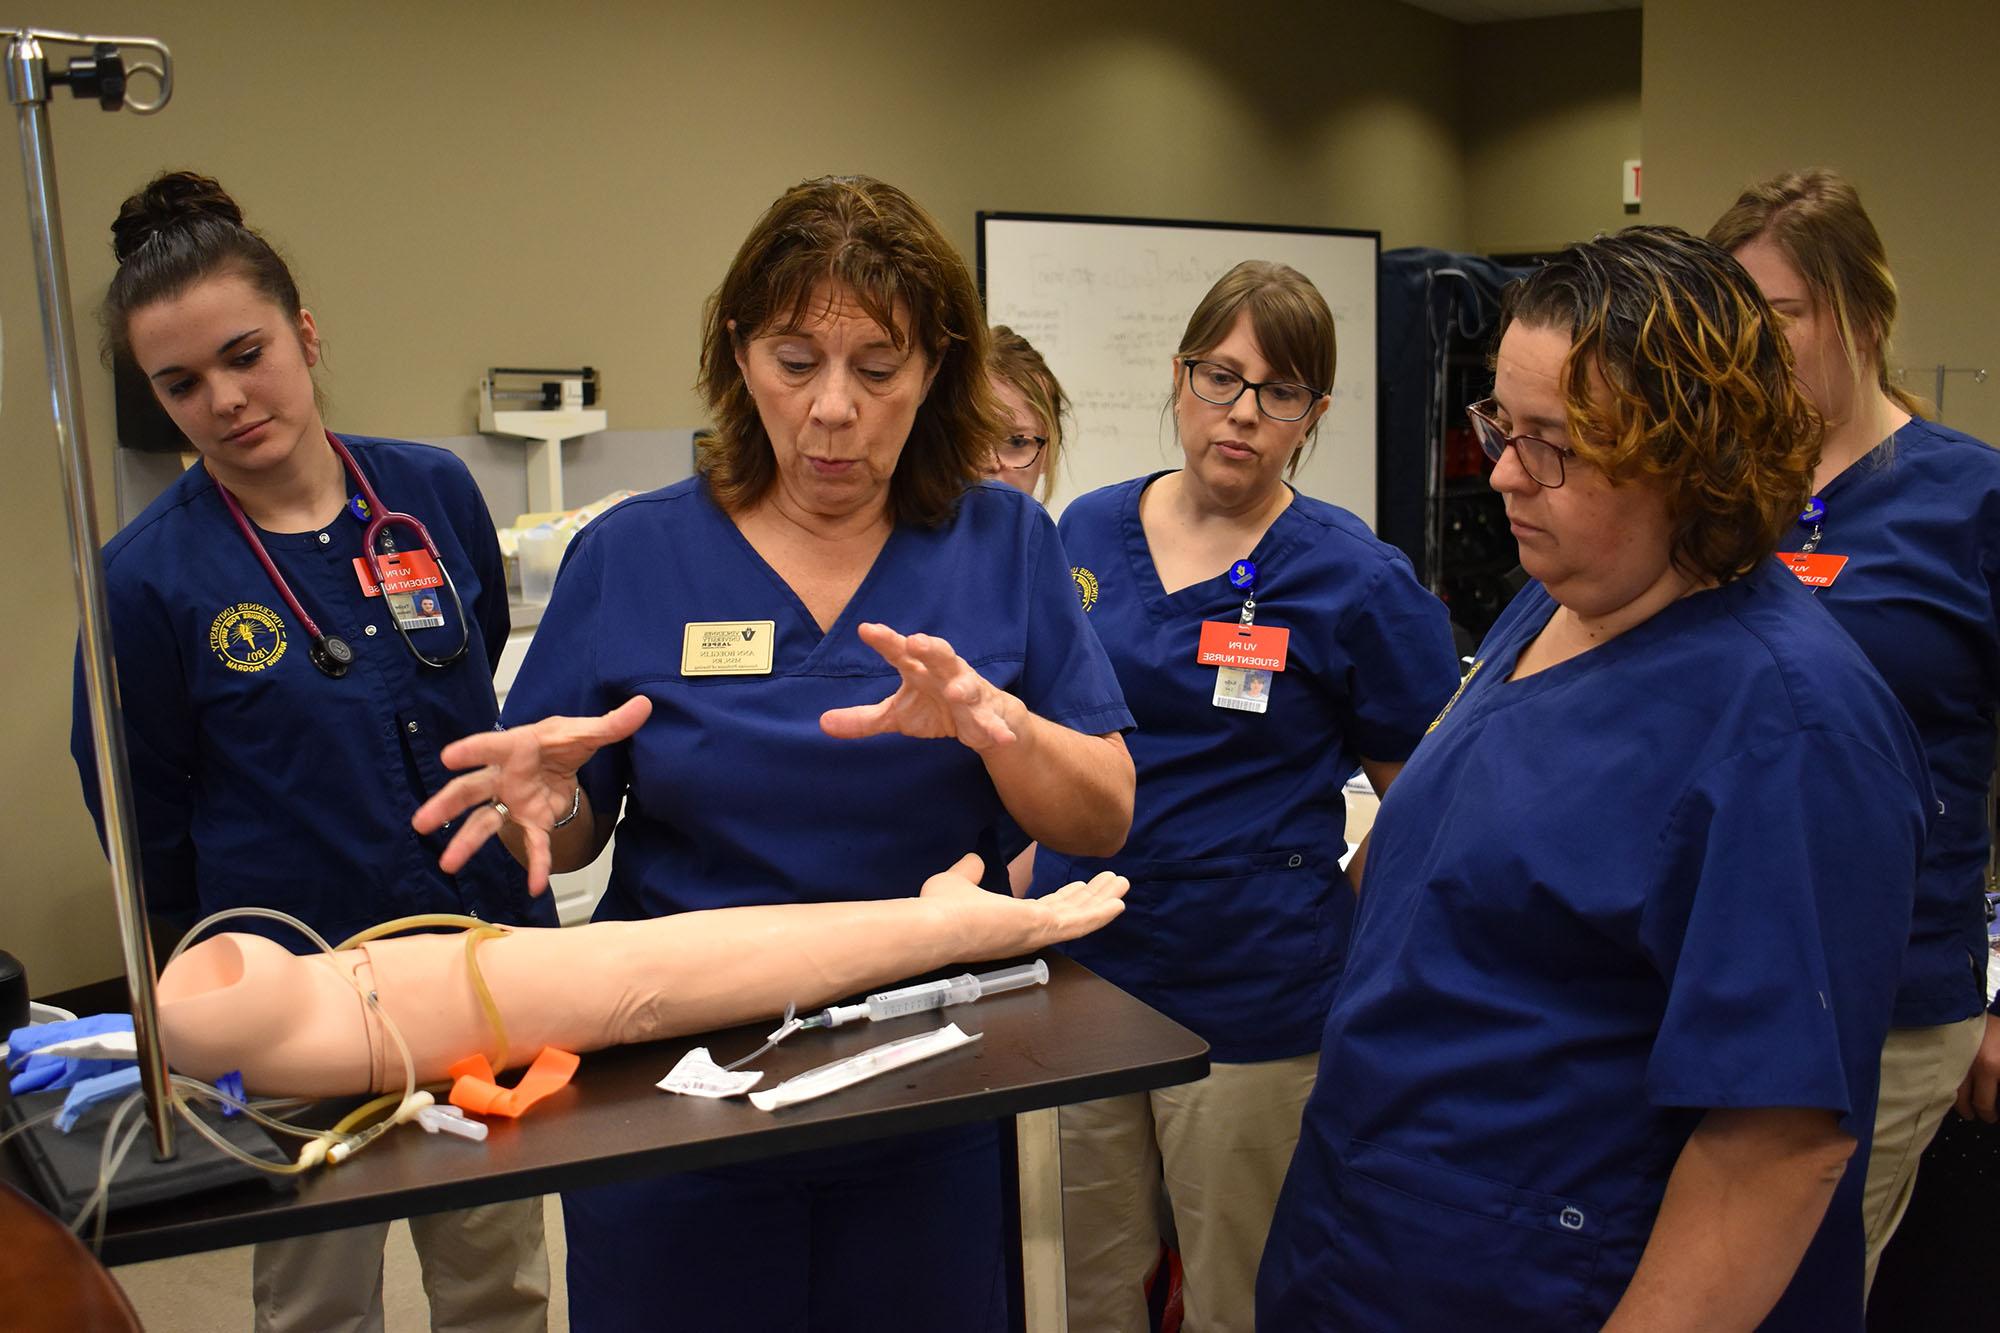 A nursing professor showing her class a fake arm for practicing inserting needles